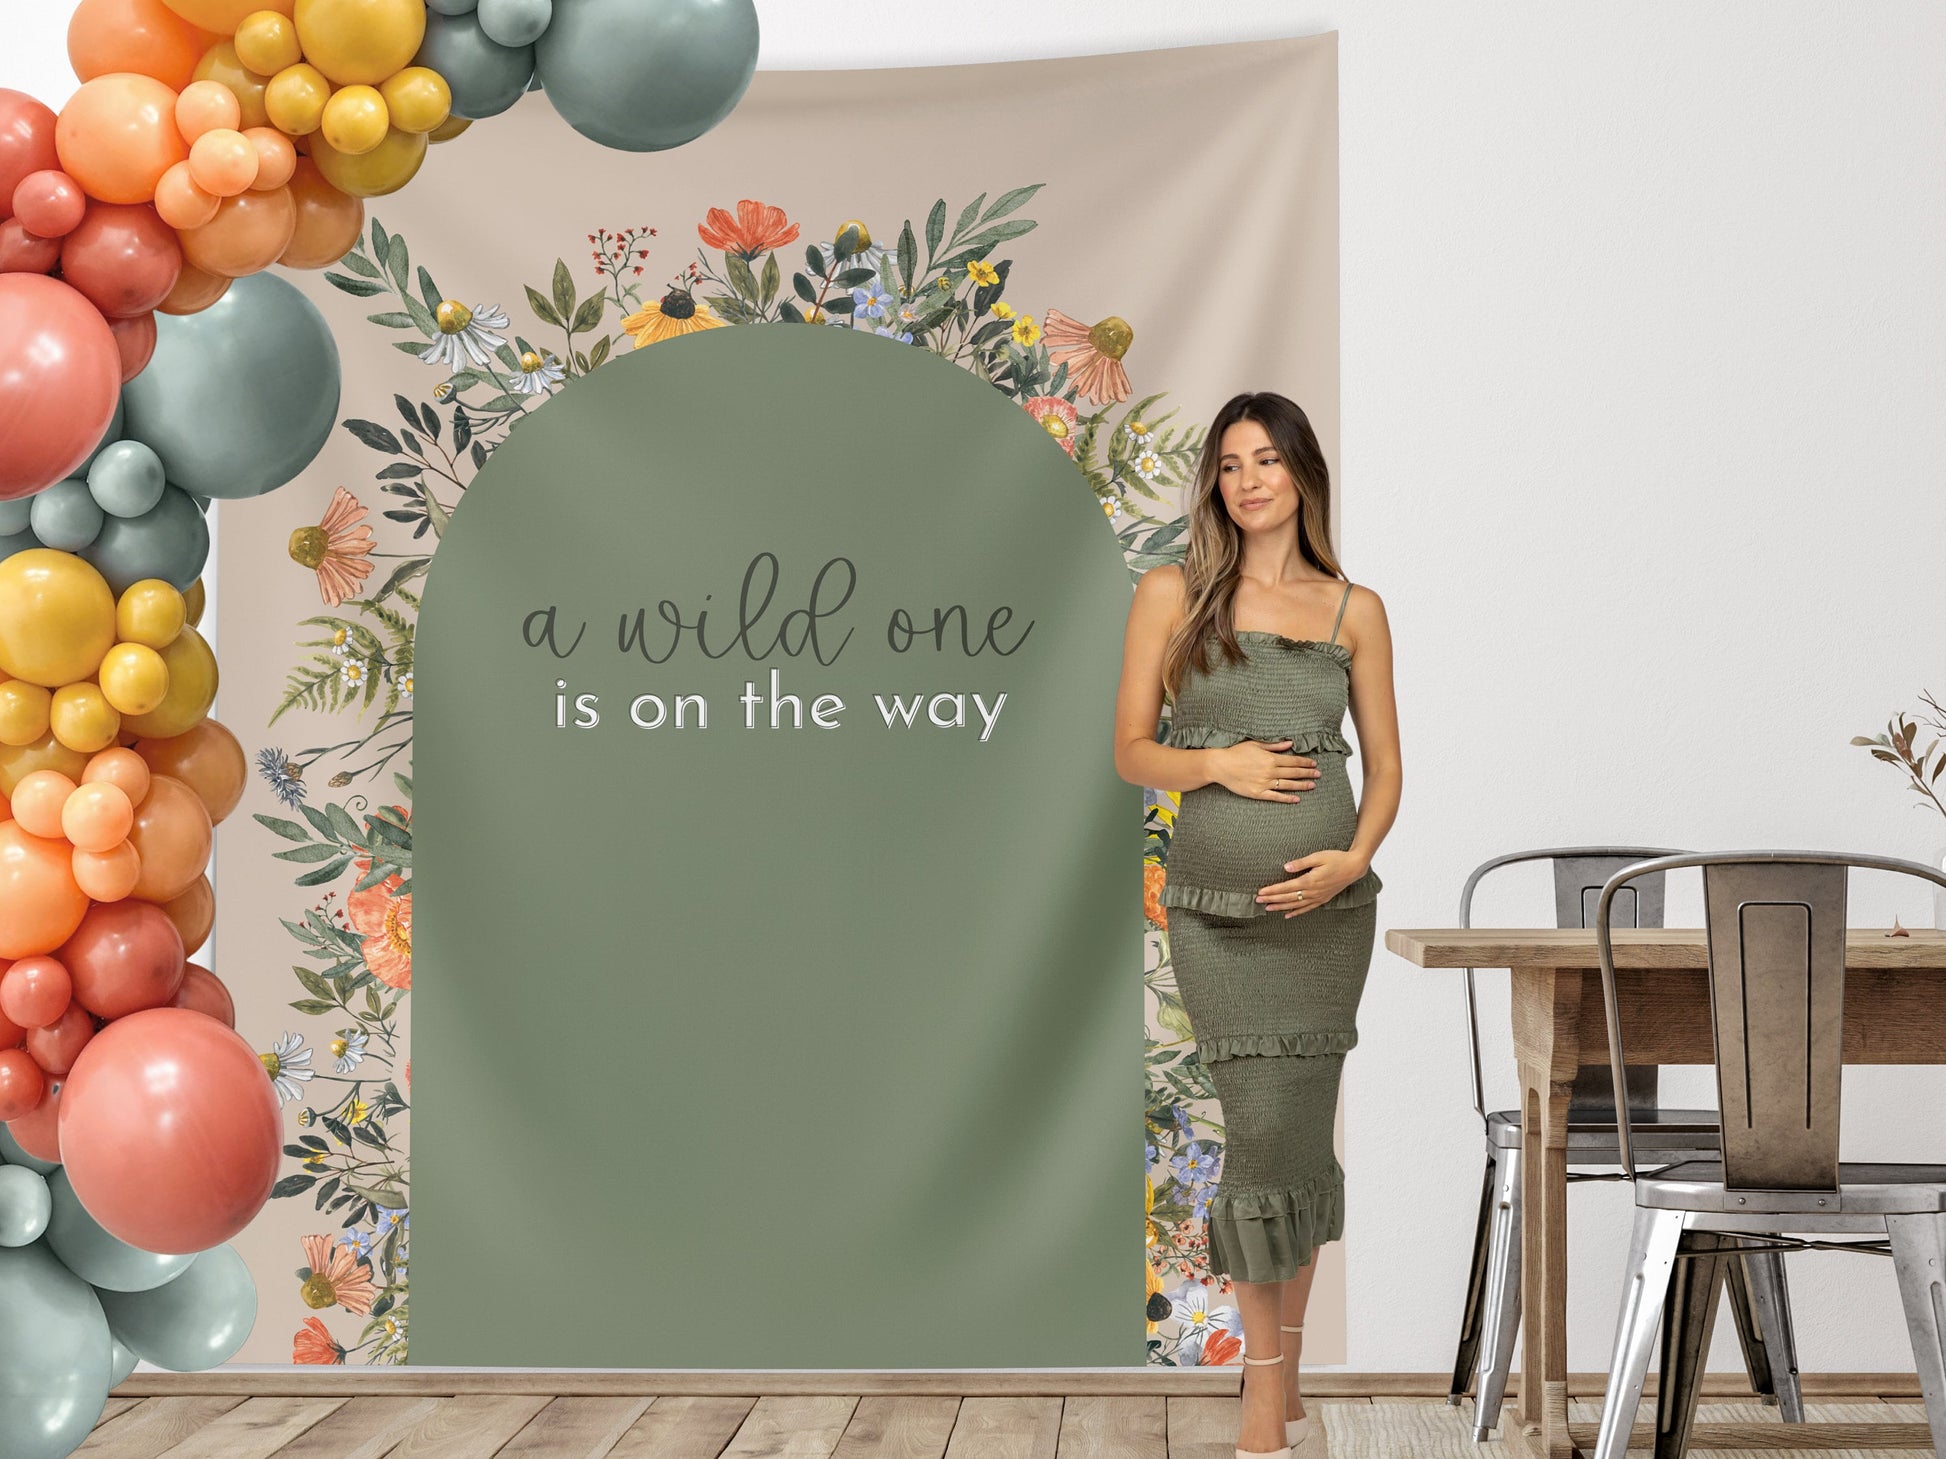 Wildflower Wild One Custom Text Backdrop | She's a Little Wildflower Custom Baby Shower or 1st Birthday Party Backdrop